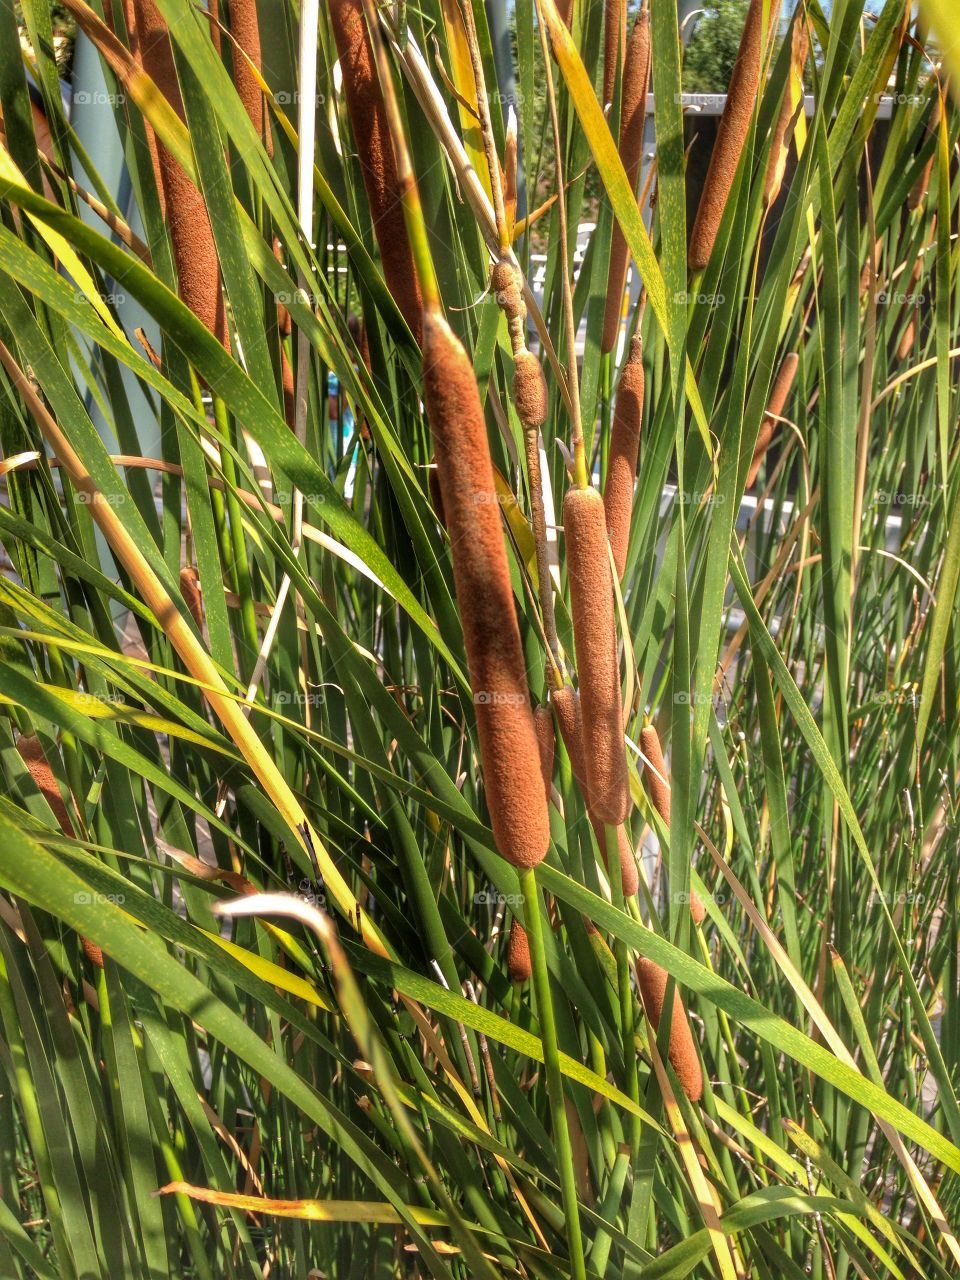 A wet habitat . Cattails in a pond